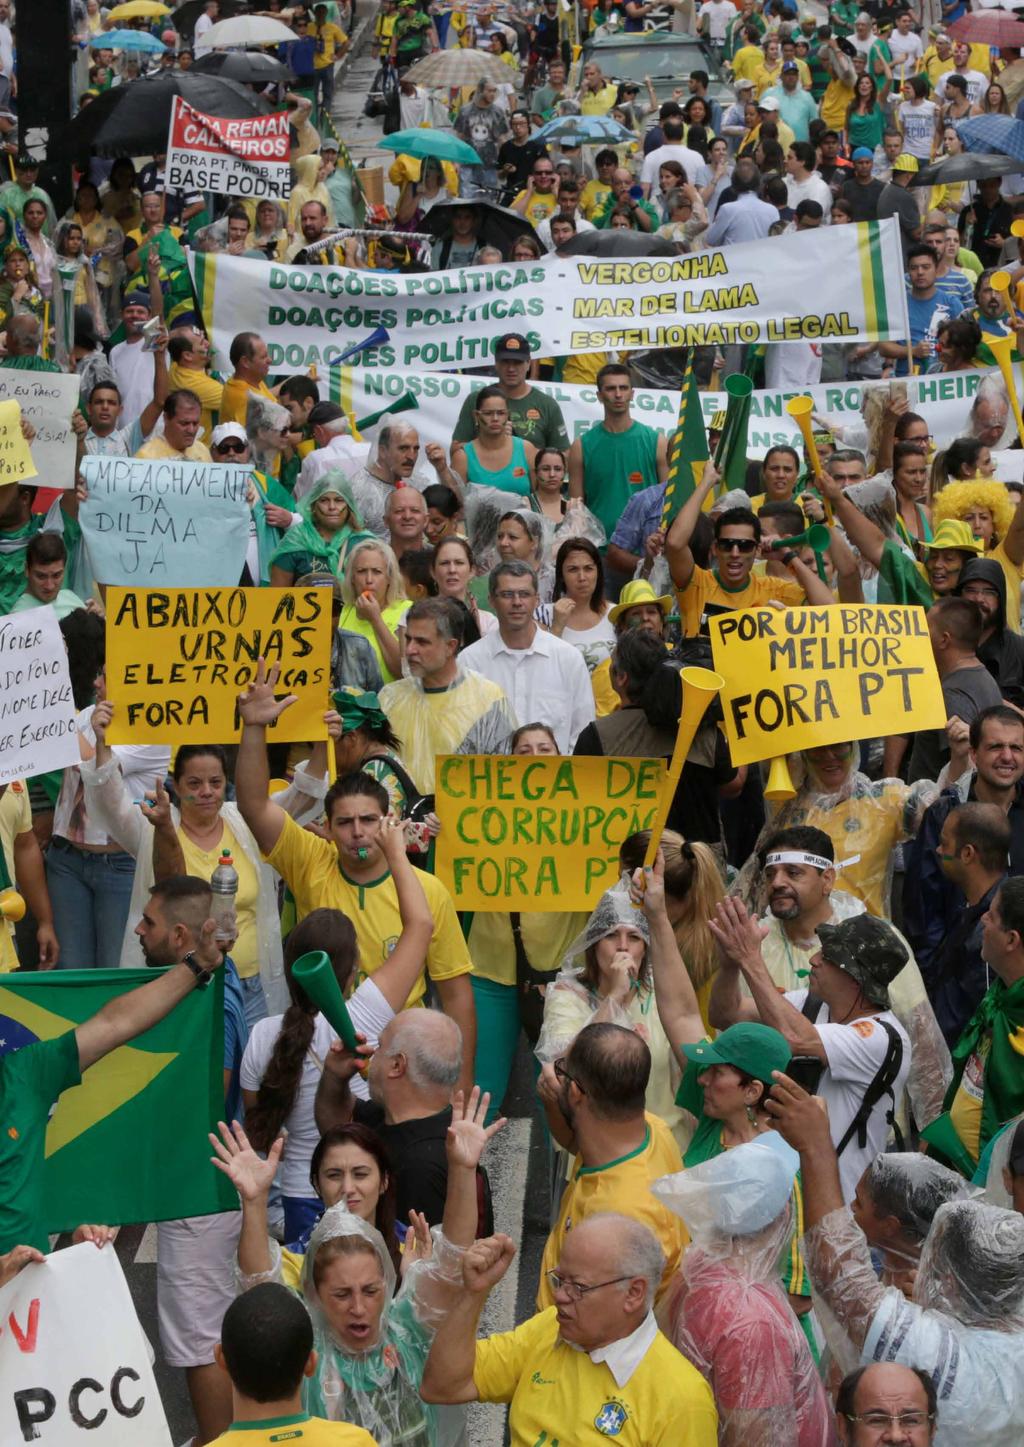 OPERATION CARWASH Since 2014, Brazil has been rocked by the largest corruption scandal in its history, the ramifications of which are still on going.